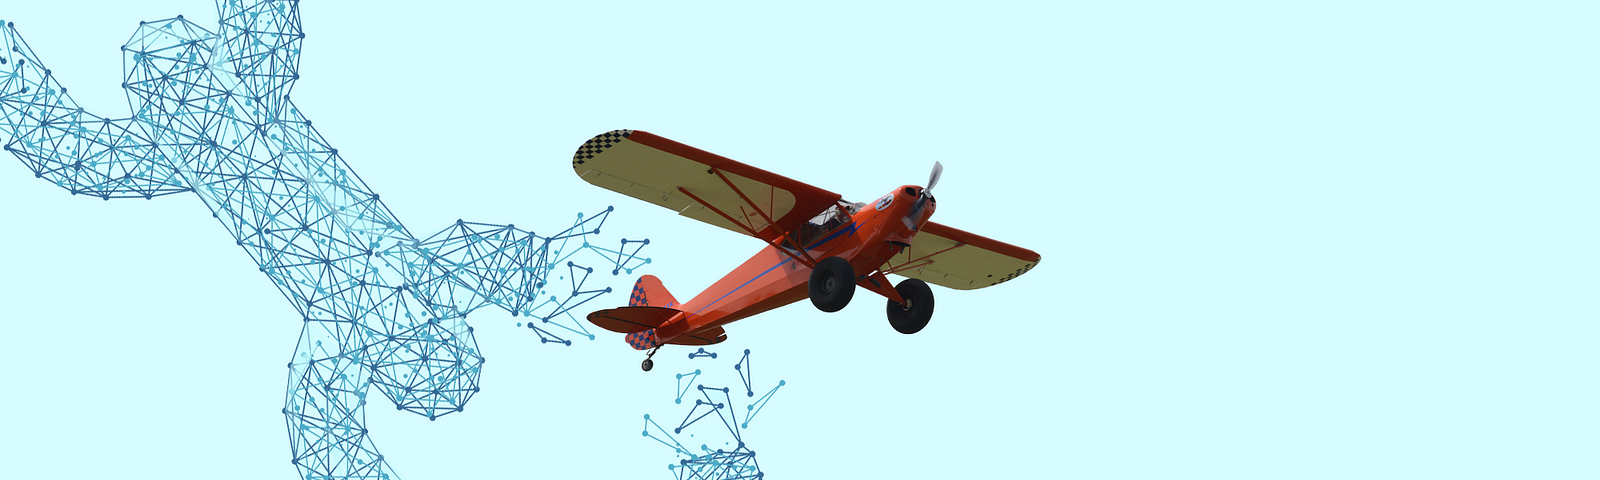 Illustration of an airplane breaking through a chain.